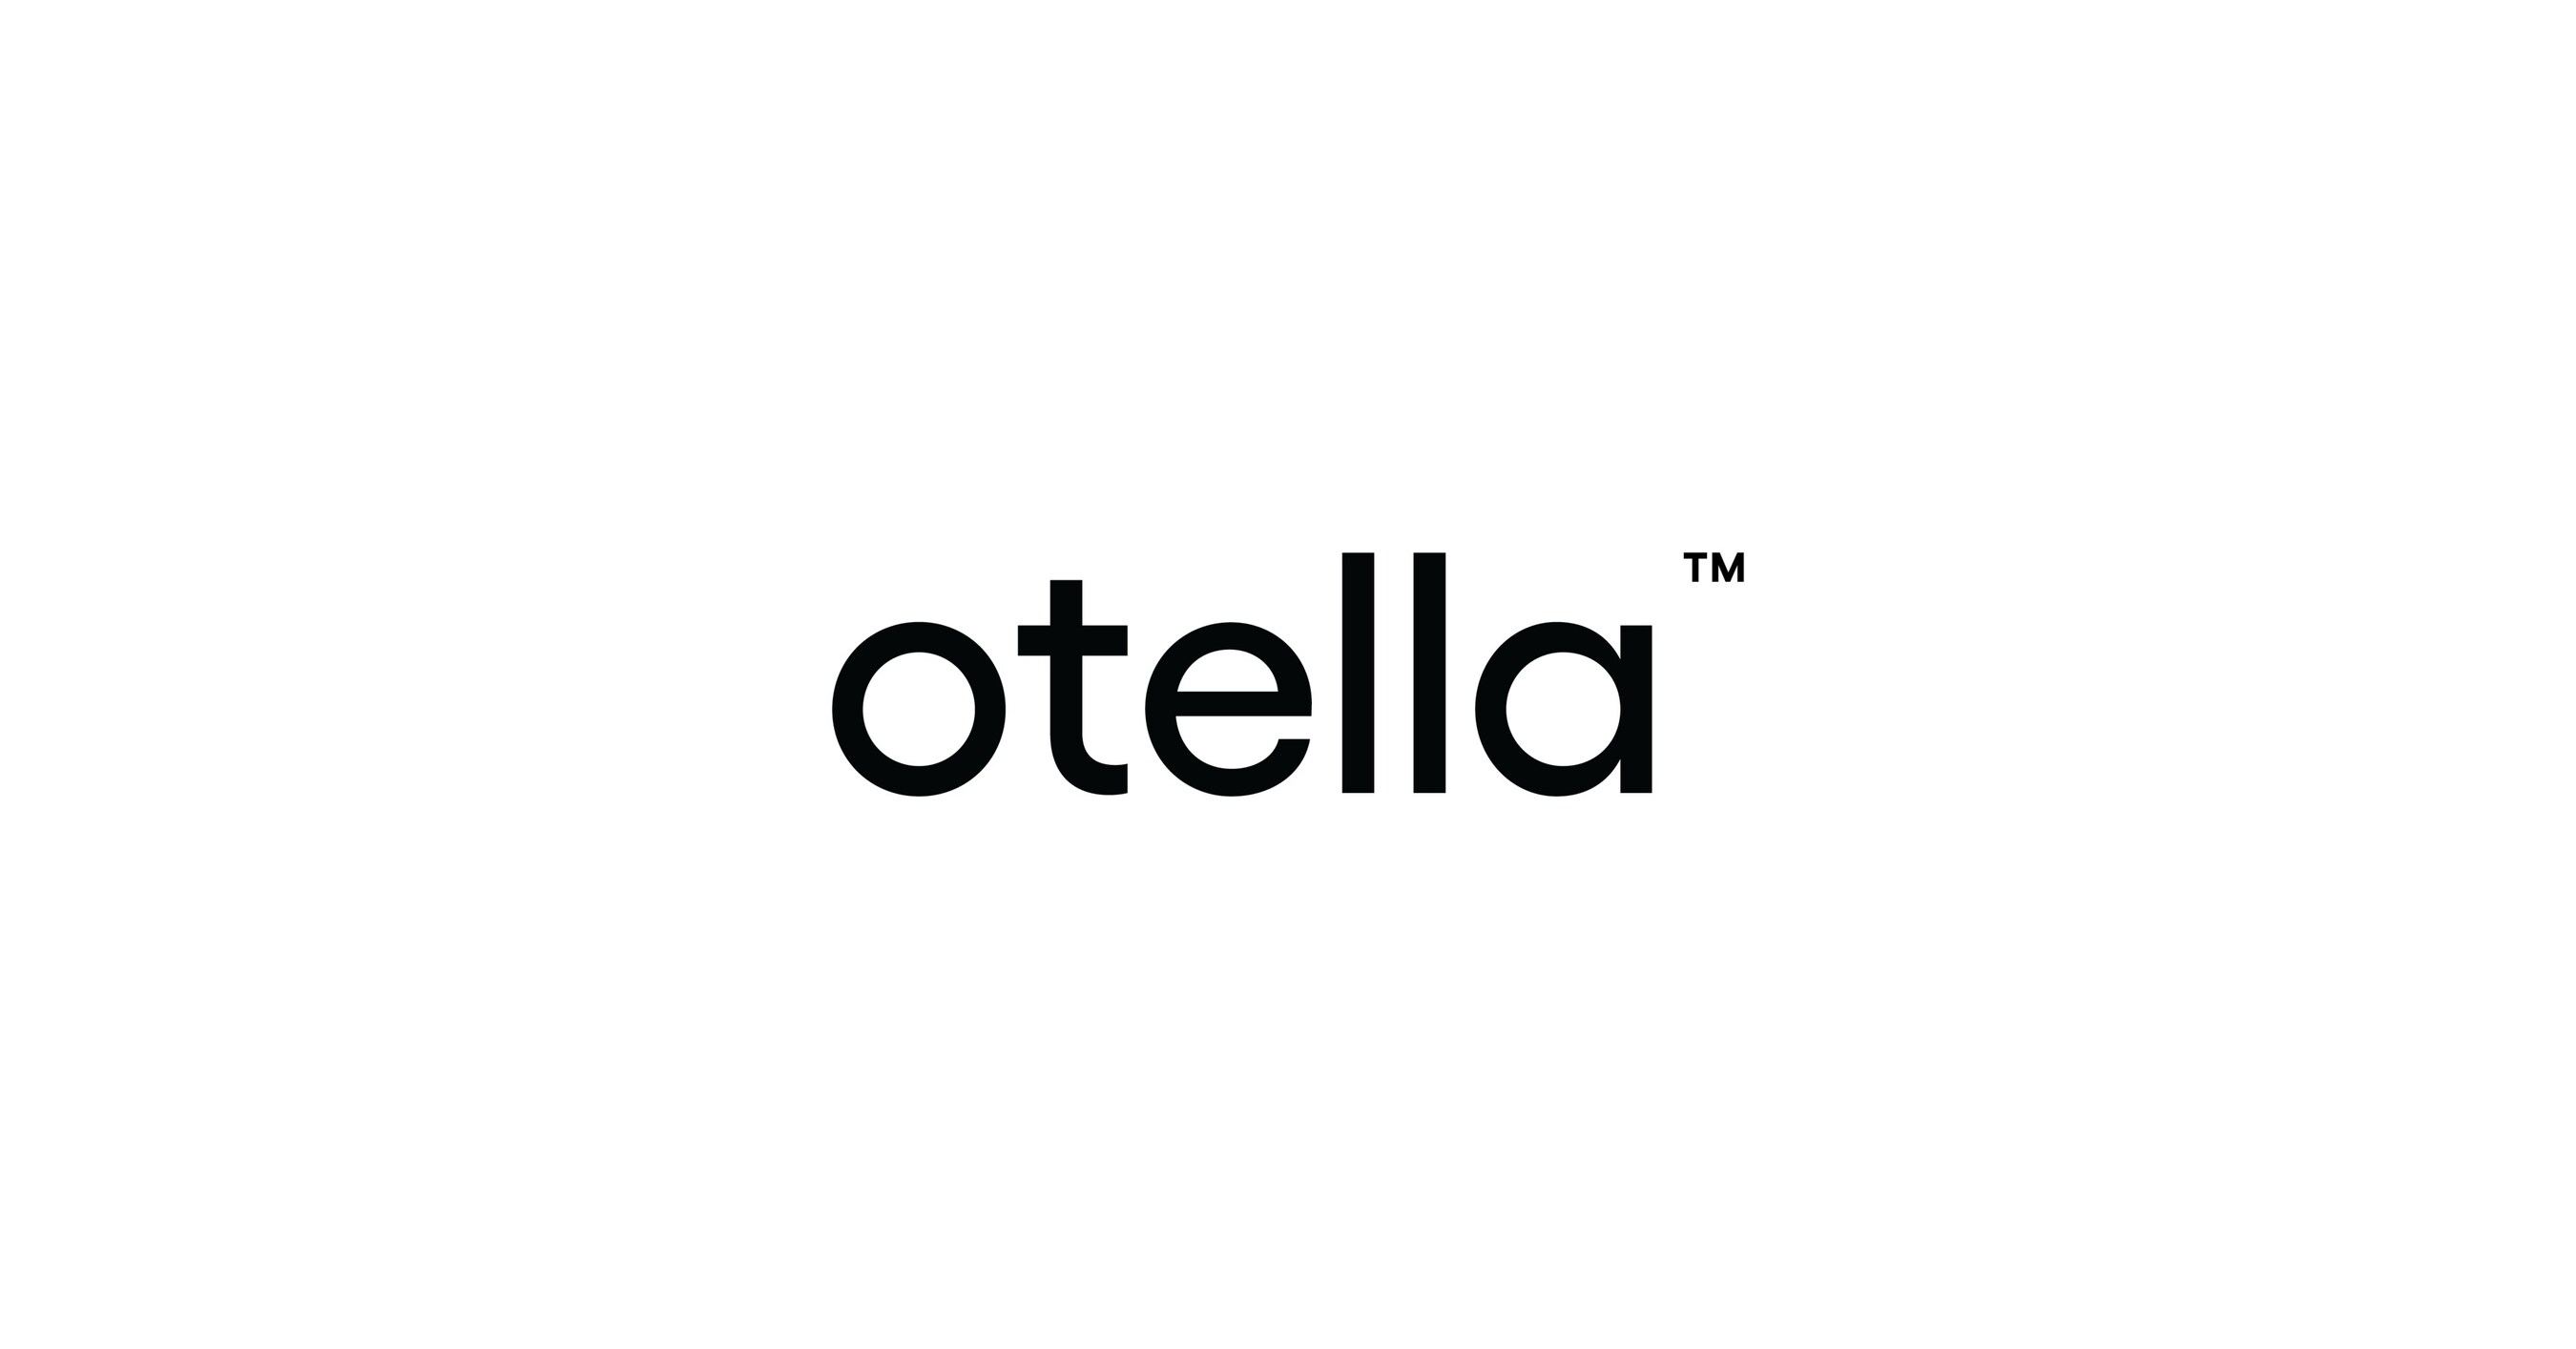 "INTRODUCING OTELLA: A REVOLUTIONARY COOLING BODY SPRAY DESIGNED TO KEEP YOU COOL, CALM, & COMPOSED IN LIFE'S HEATED MOMENTS"